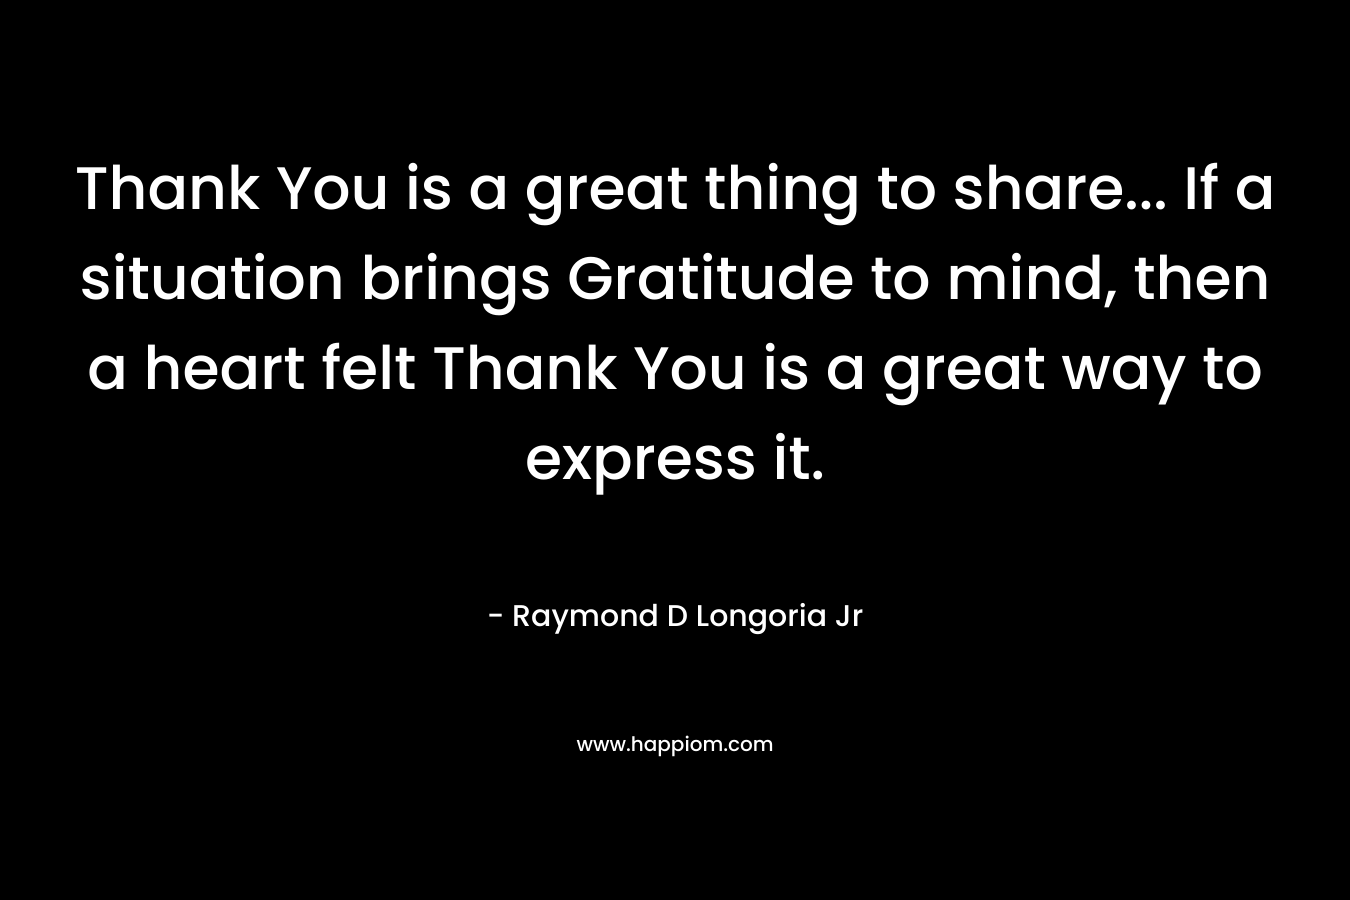 Thank You is a great thing to share… If a situation brings Gratitude to mind, then a heart felt Thank You is a great way to express it. – Raymond D Longoria Jr